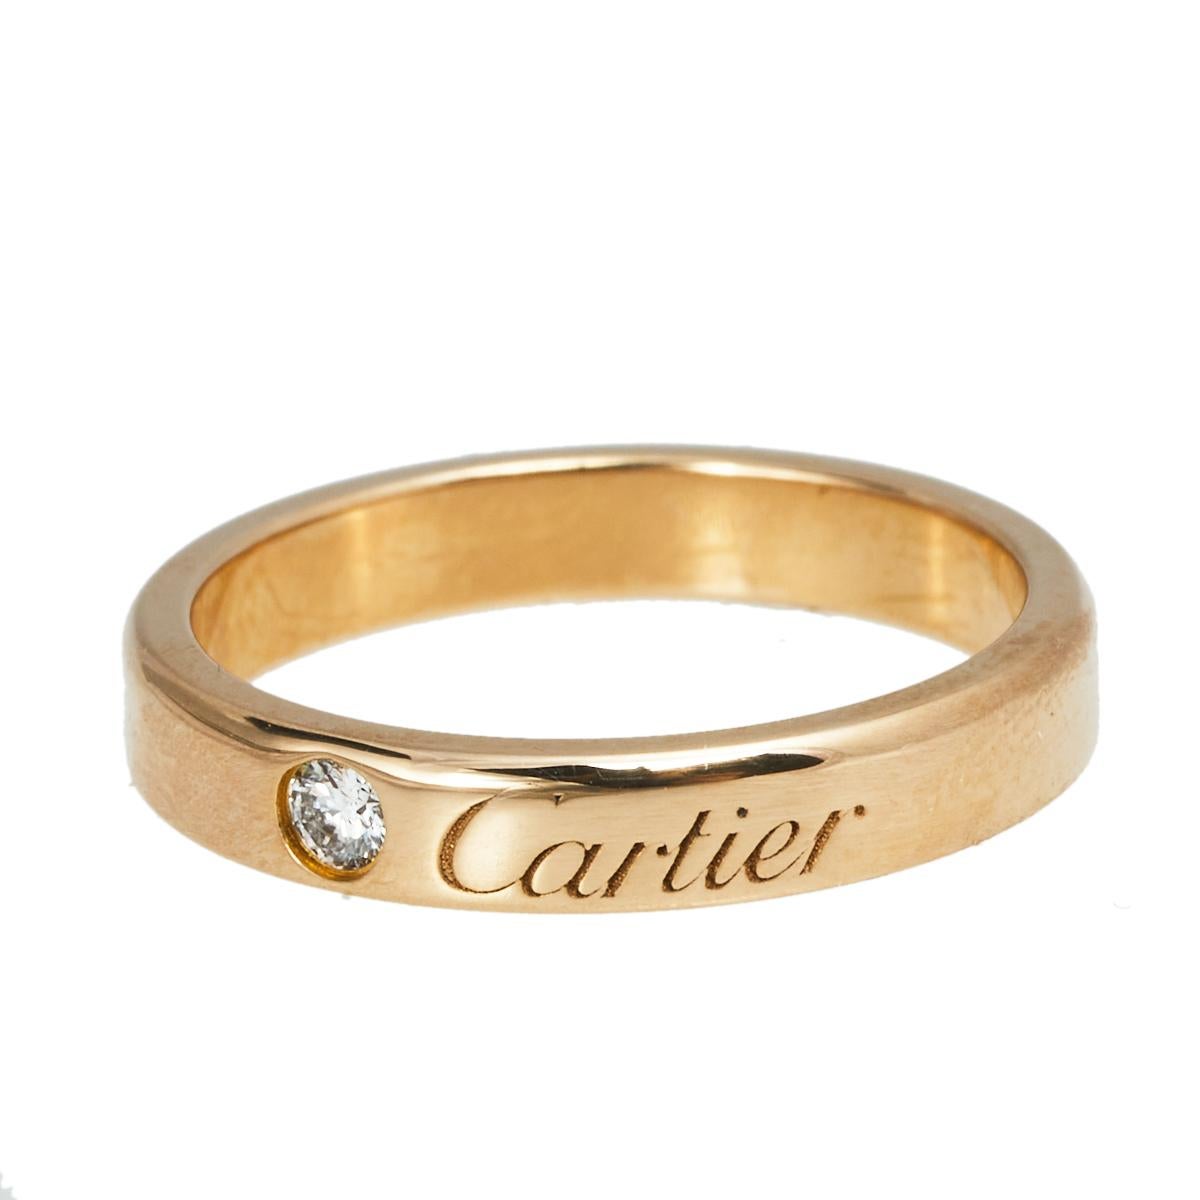 Let this C de Cartier band ring be a favored choice when it comes to choosing a wedding or engagement ring. The ring is made from 18k rose gold and highlighted by a diamond and brand engravings. It will be a prized accessory you will love wearing